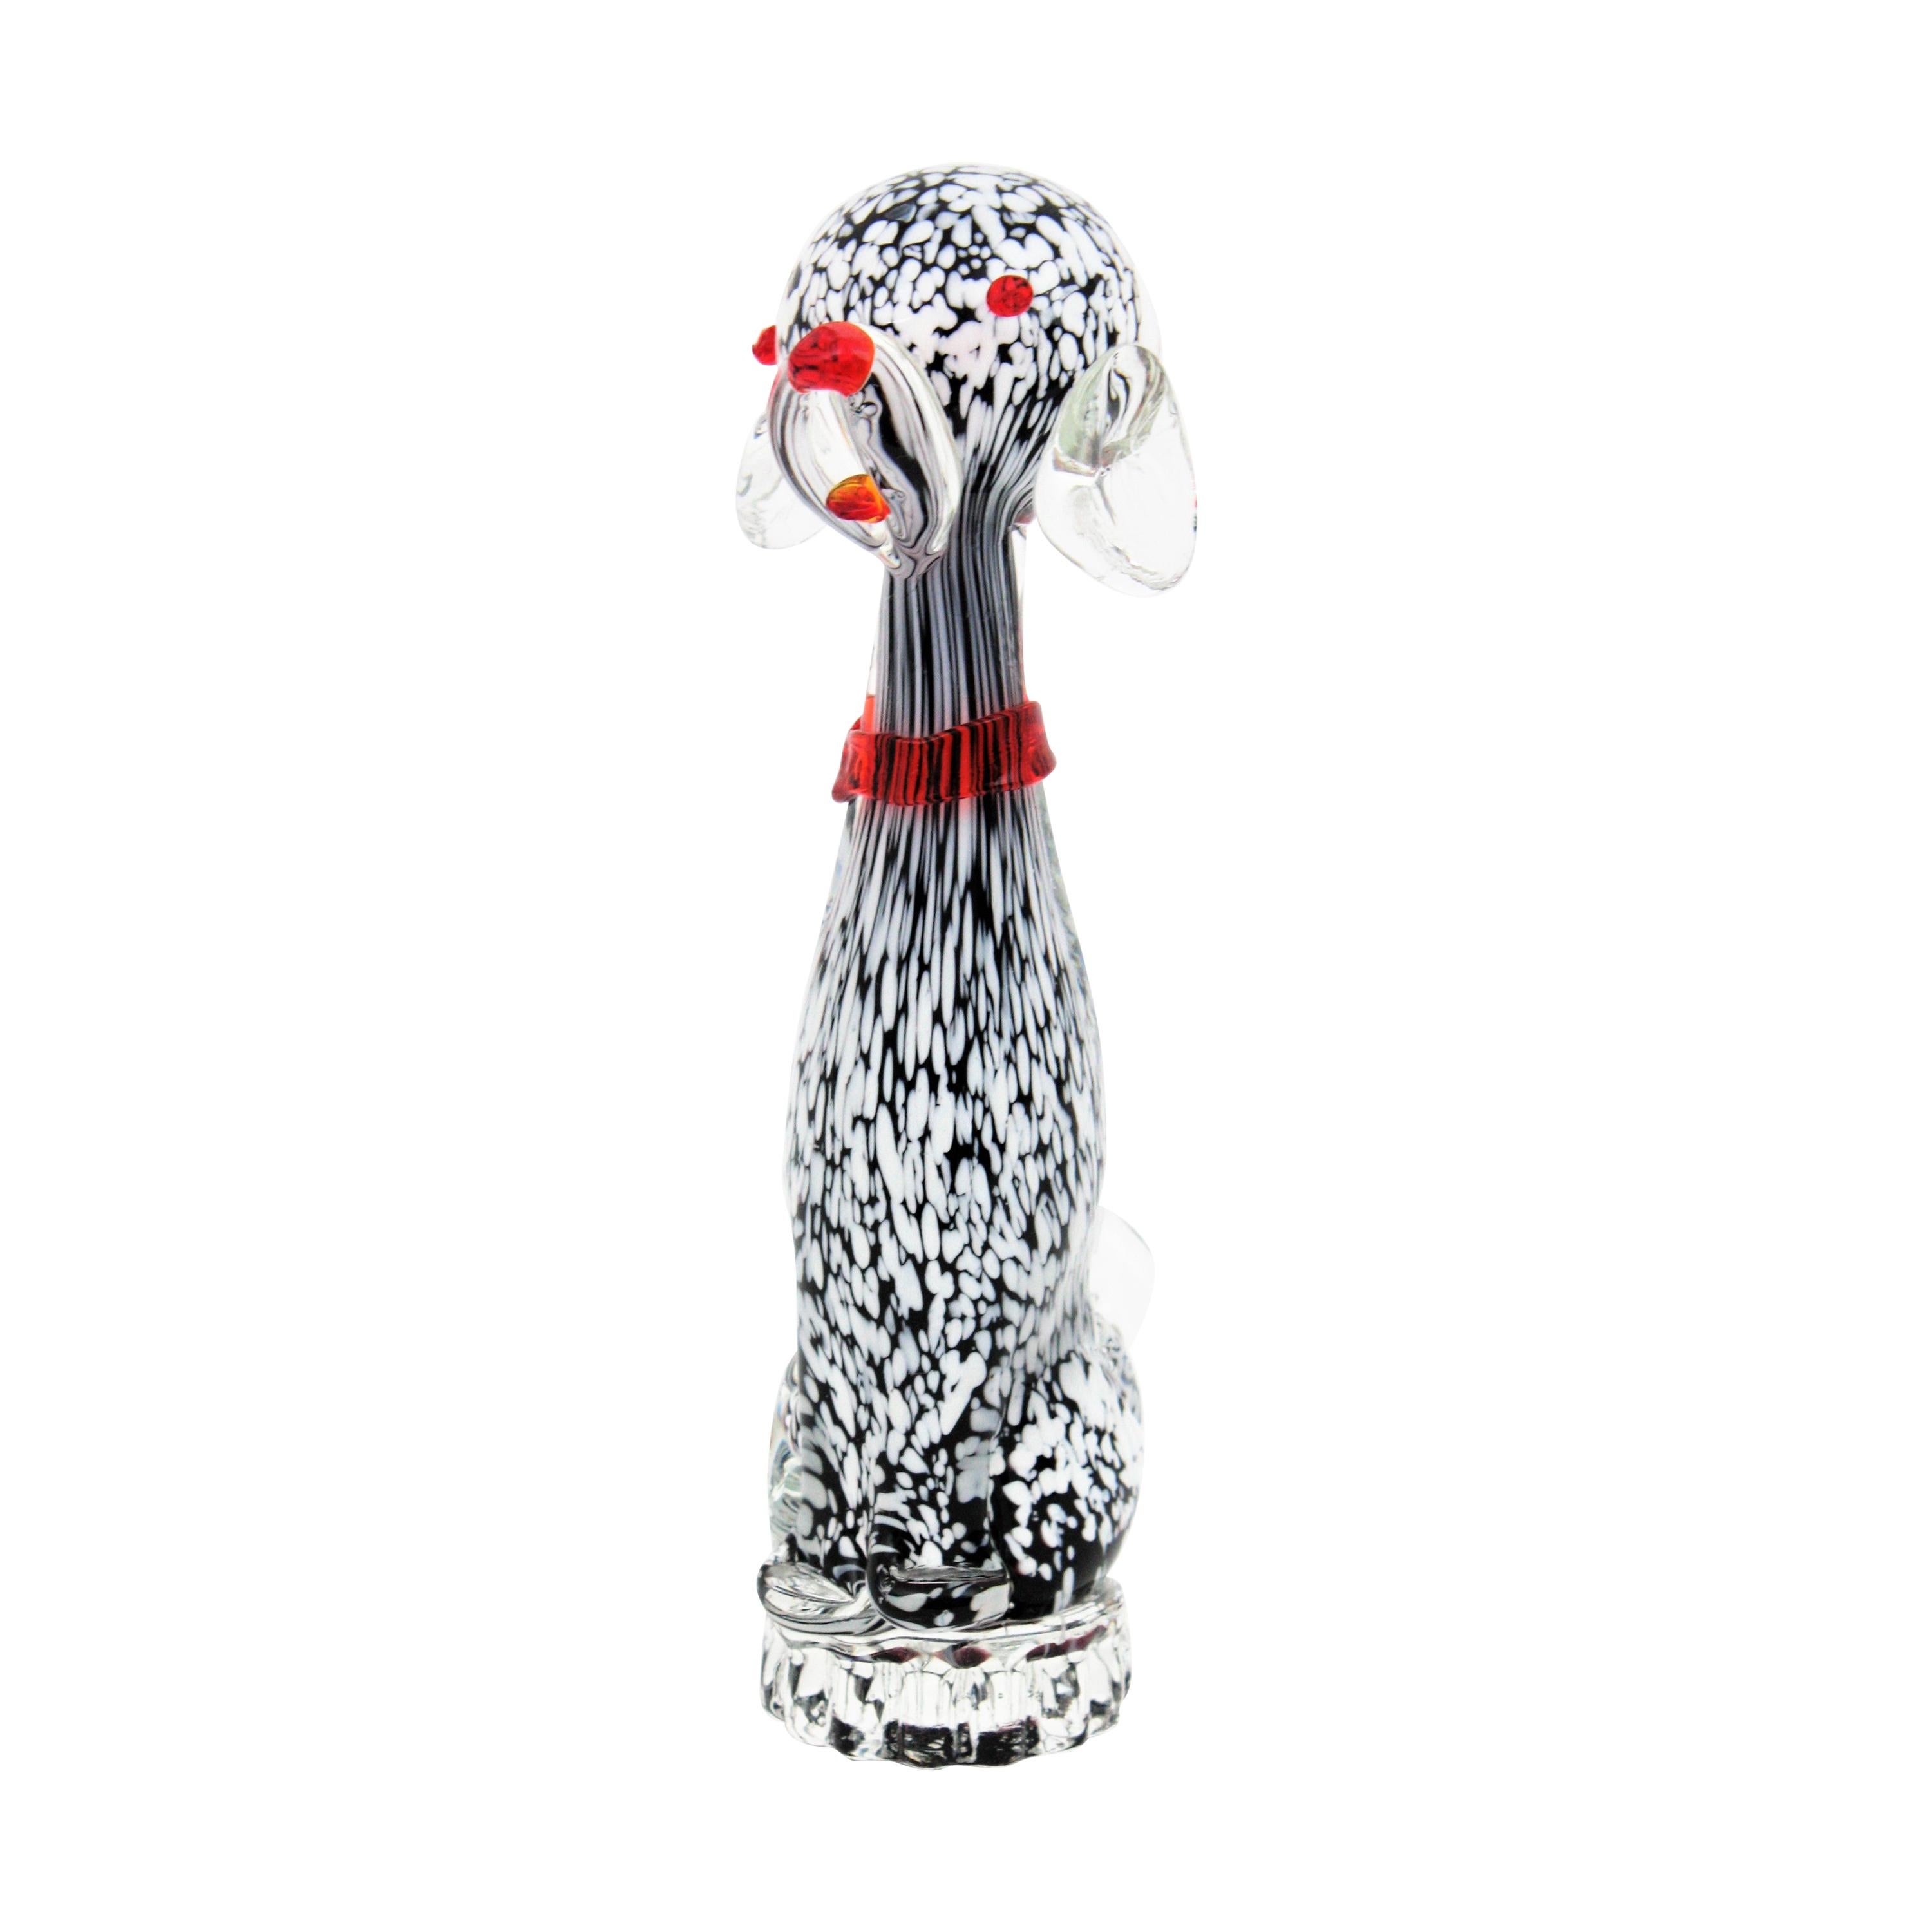 Cute hand blown Murano glass Puppy Dog Figurine Sculpture in Black and White Murrine, Italy, 1950s.
This nice doggy stands up on a small clear glass base. It has white spots on a black background and it is finished with clear glass using the